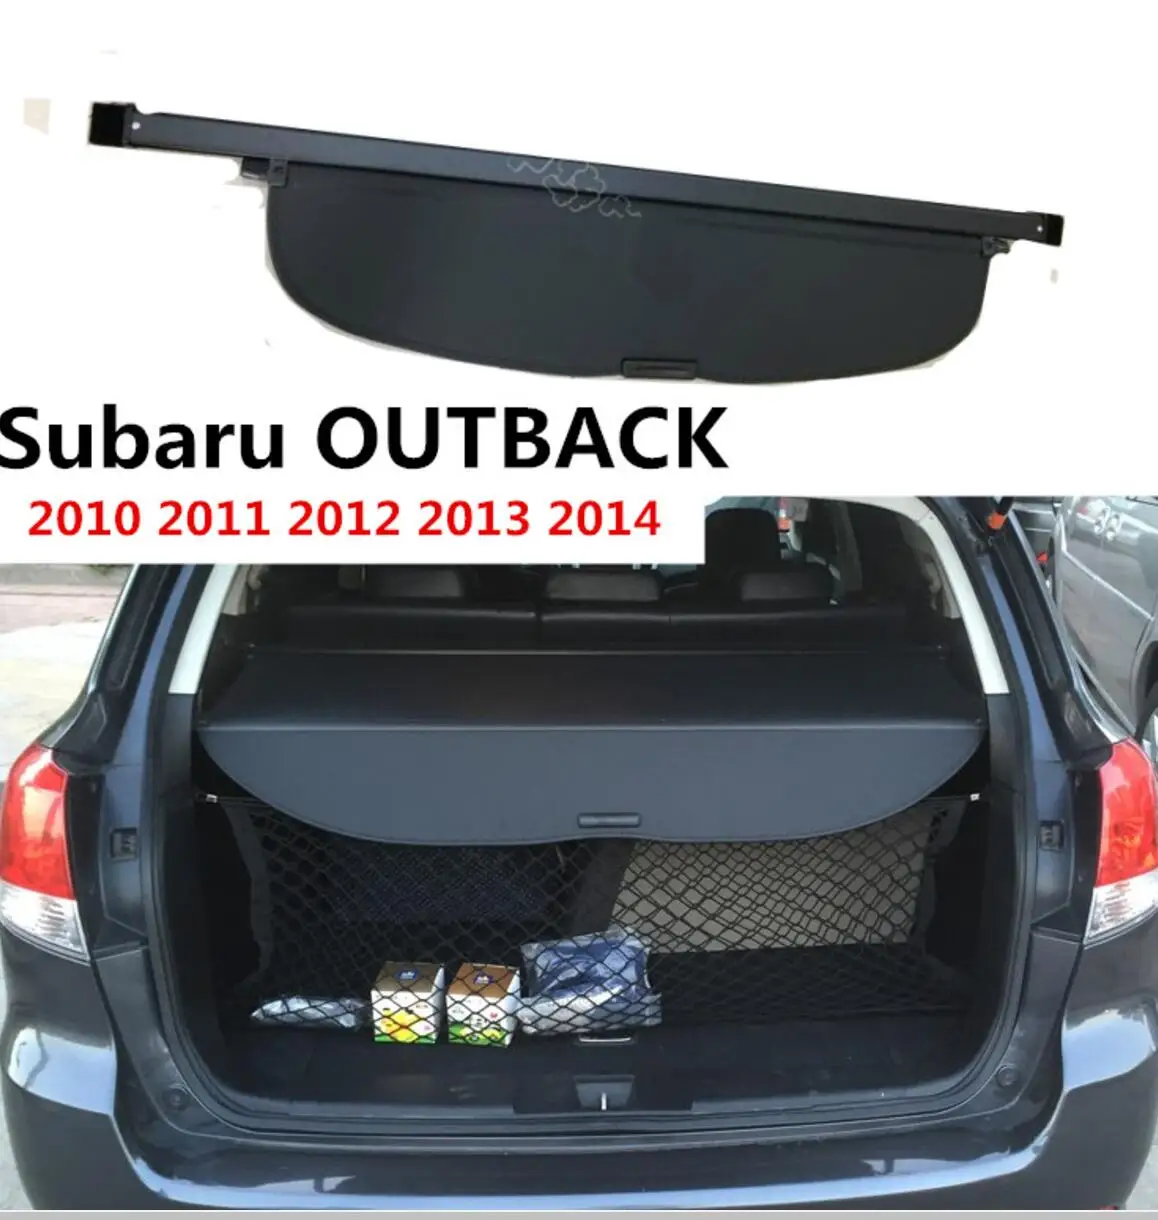 

car accessories High Qualit Car Rear Trunk Cargo Cover Security Shield Screen shade For Subaru OUTBACK 2010-2014 Car Accessories